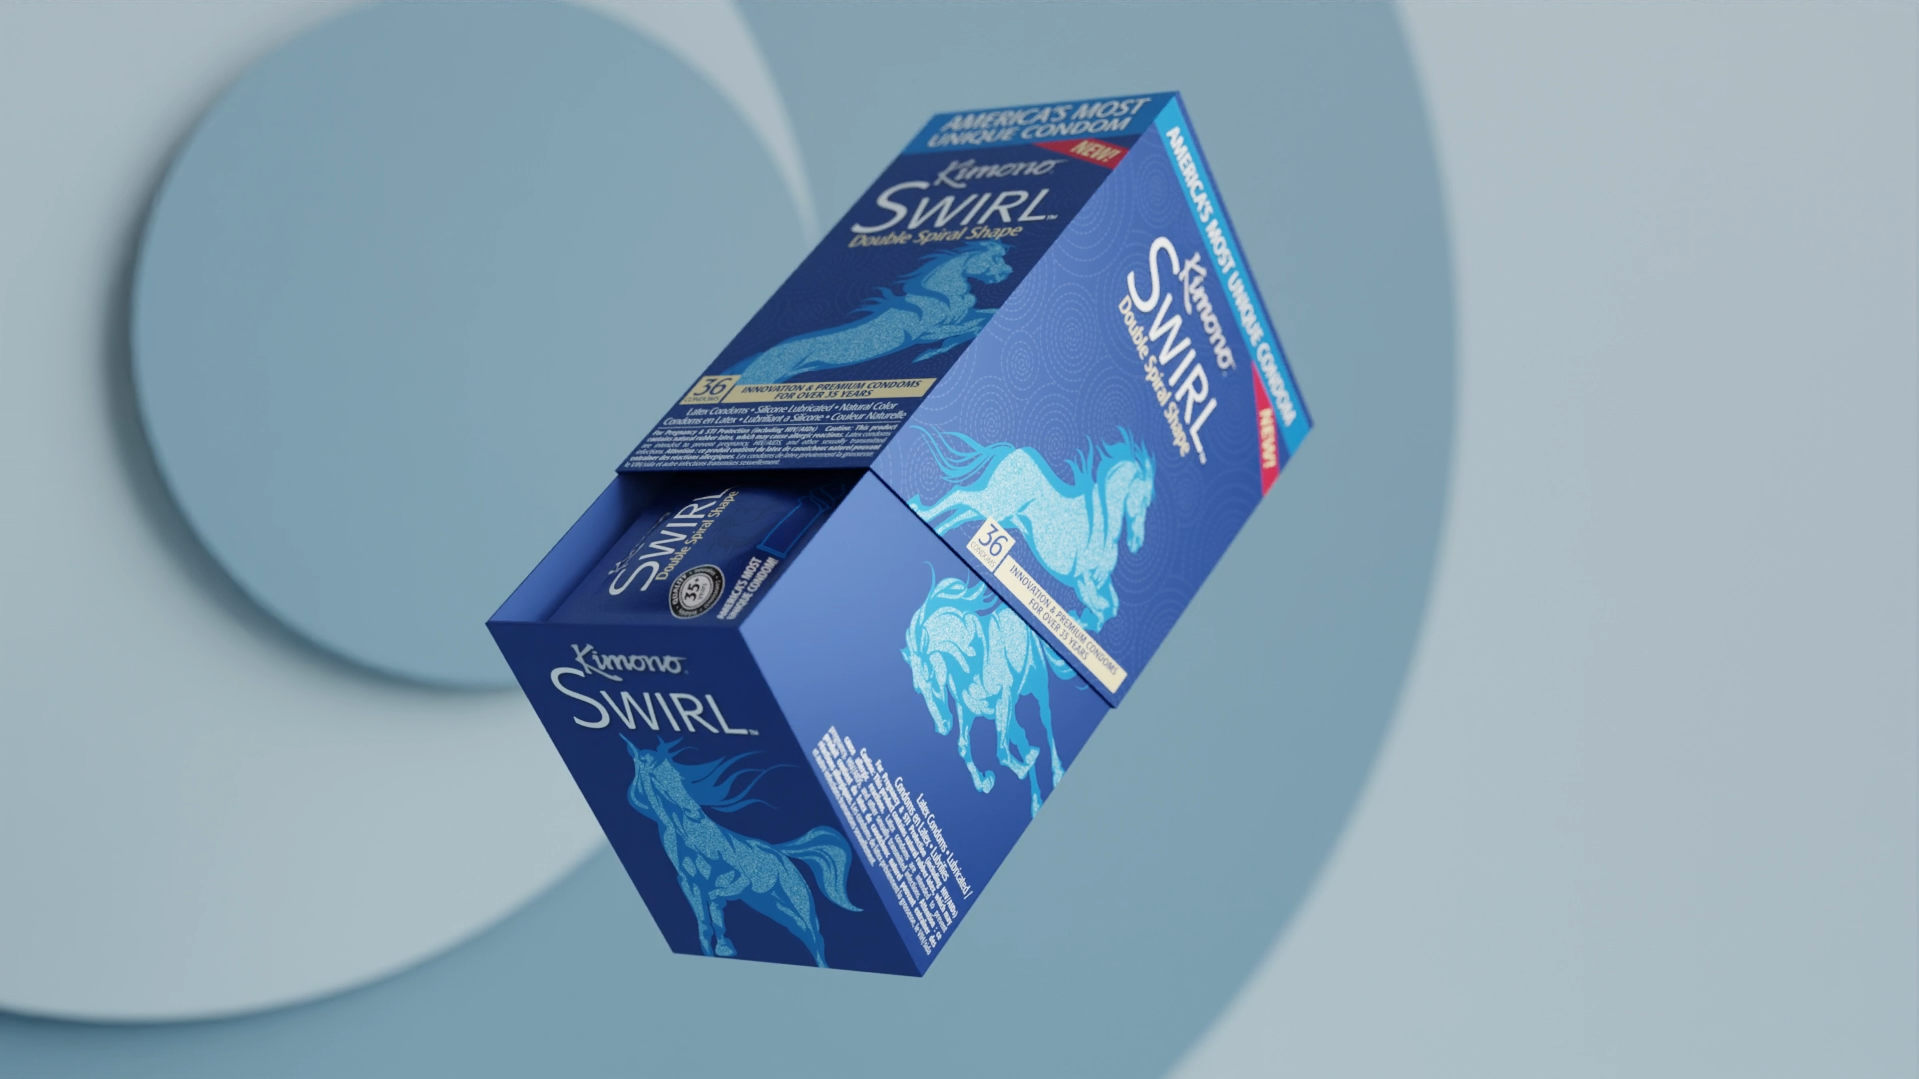 Charger la vidéo : Kimono Swirl condoms, America&#39;s only double helix shaped condom. The condom is revealed out of the packaging. It uses premium natural latex. Less constriction, more comfort. Double swirl for added comfort, friction, and energy. For him, her, and them. What are you waiting for? Get your swirl on.